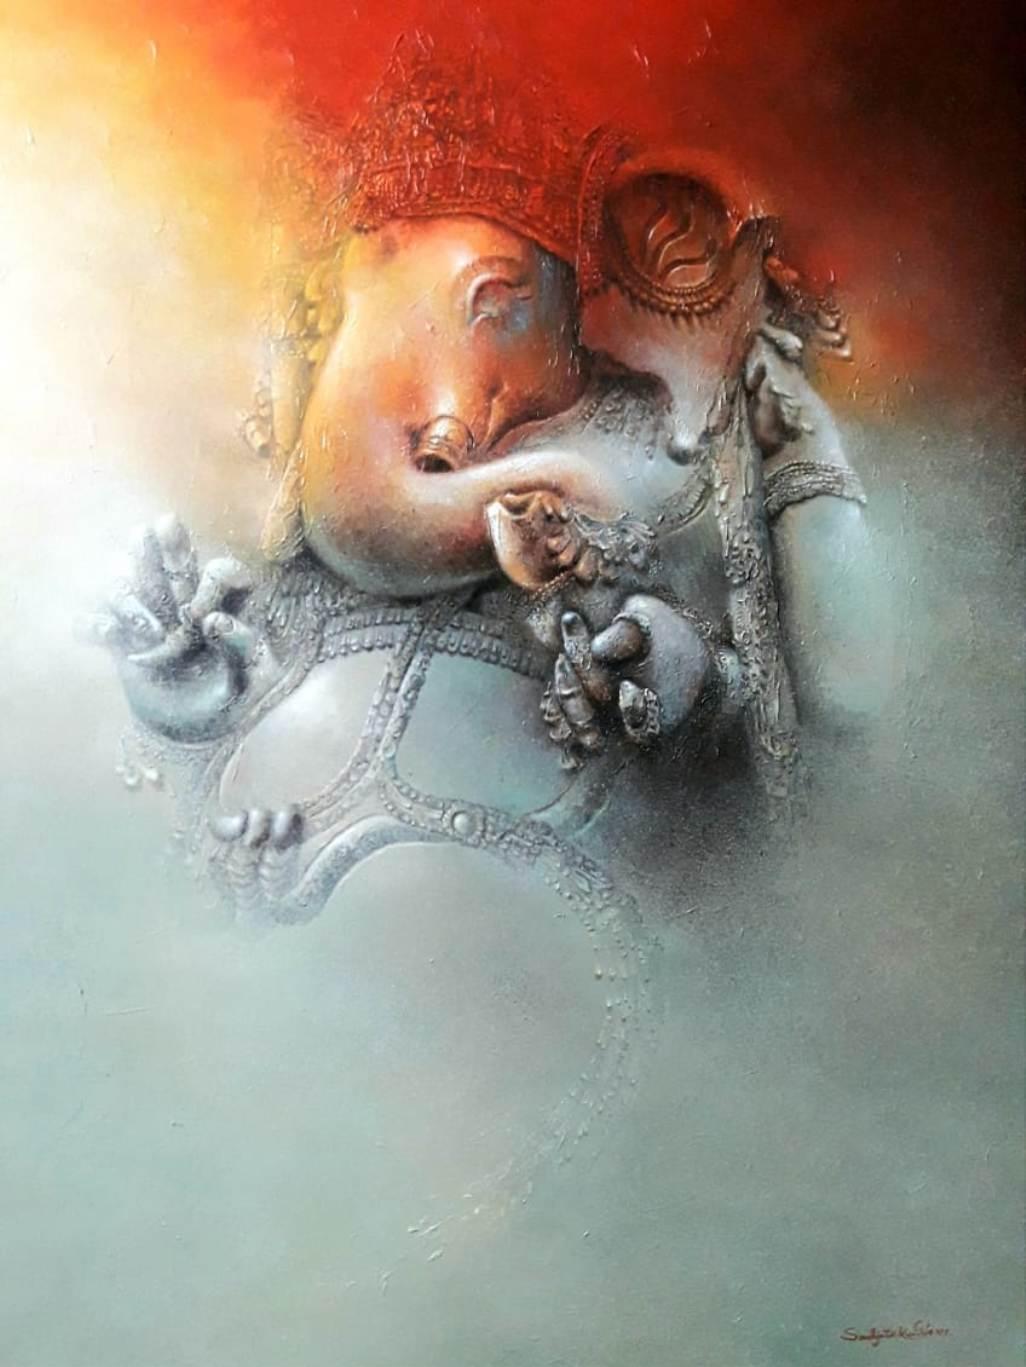 Sudipta Kundu Figurative Painting - Ganesha, Acrylic on Canvas, Red, Orange Color by Contemporary Artist "In Stock"